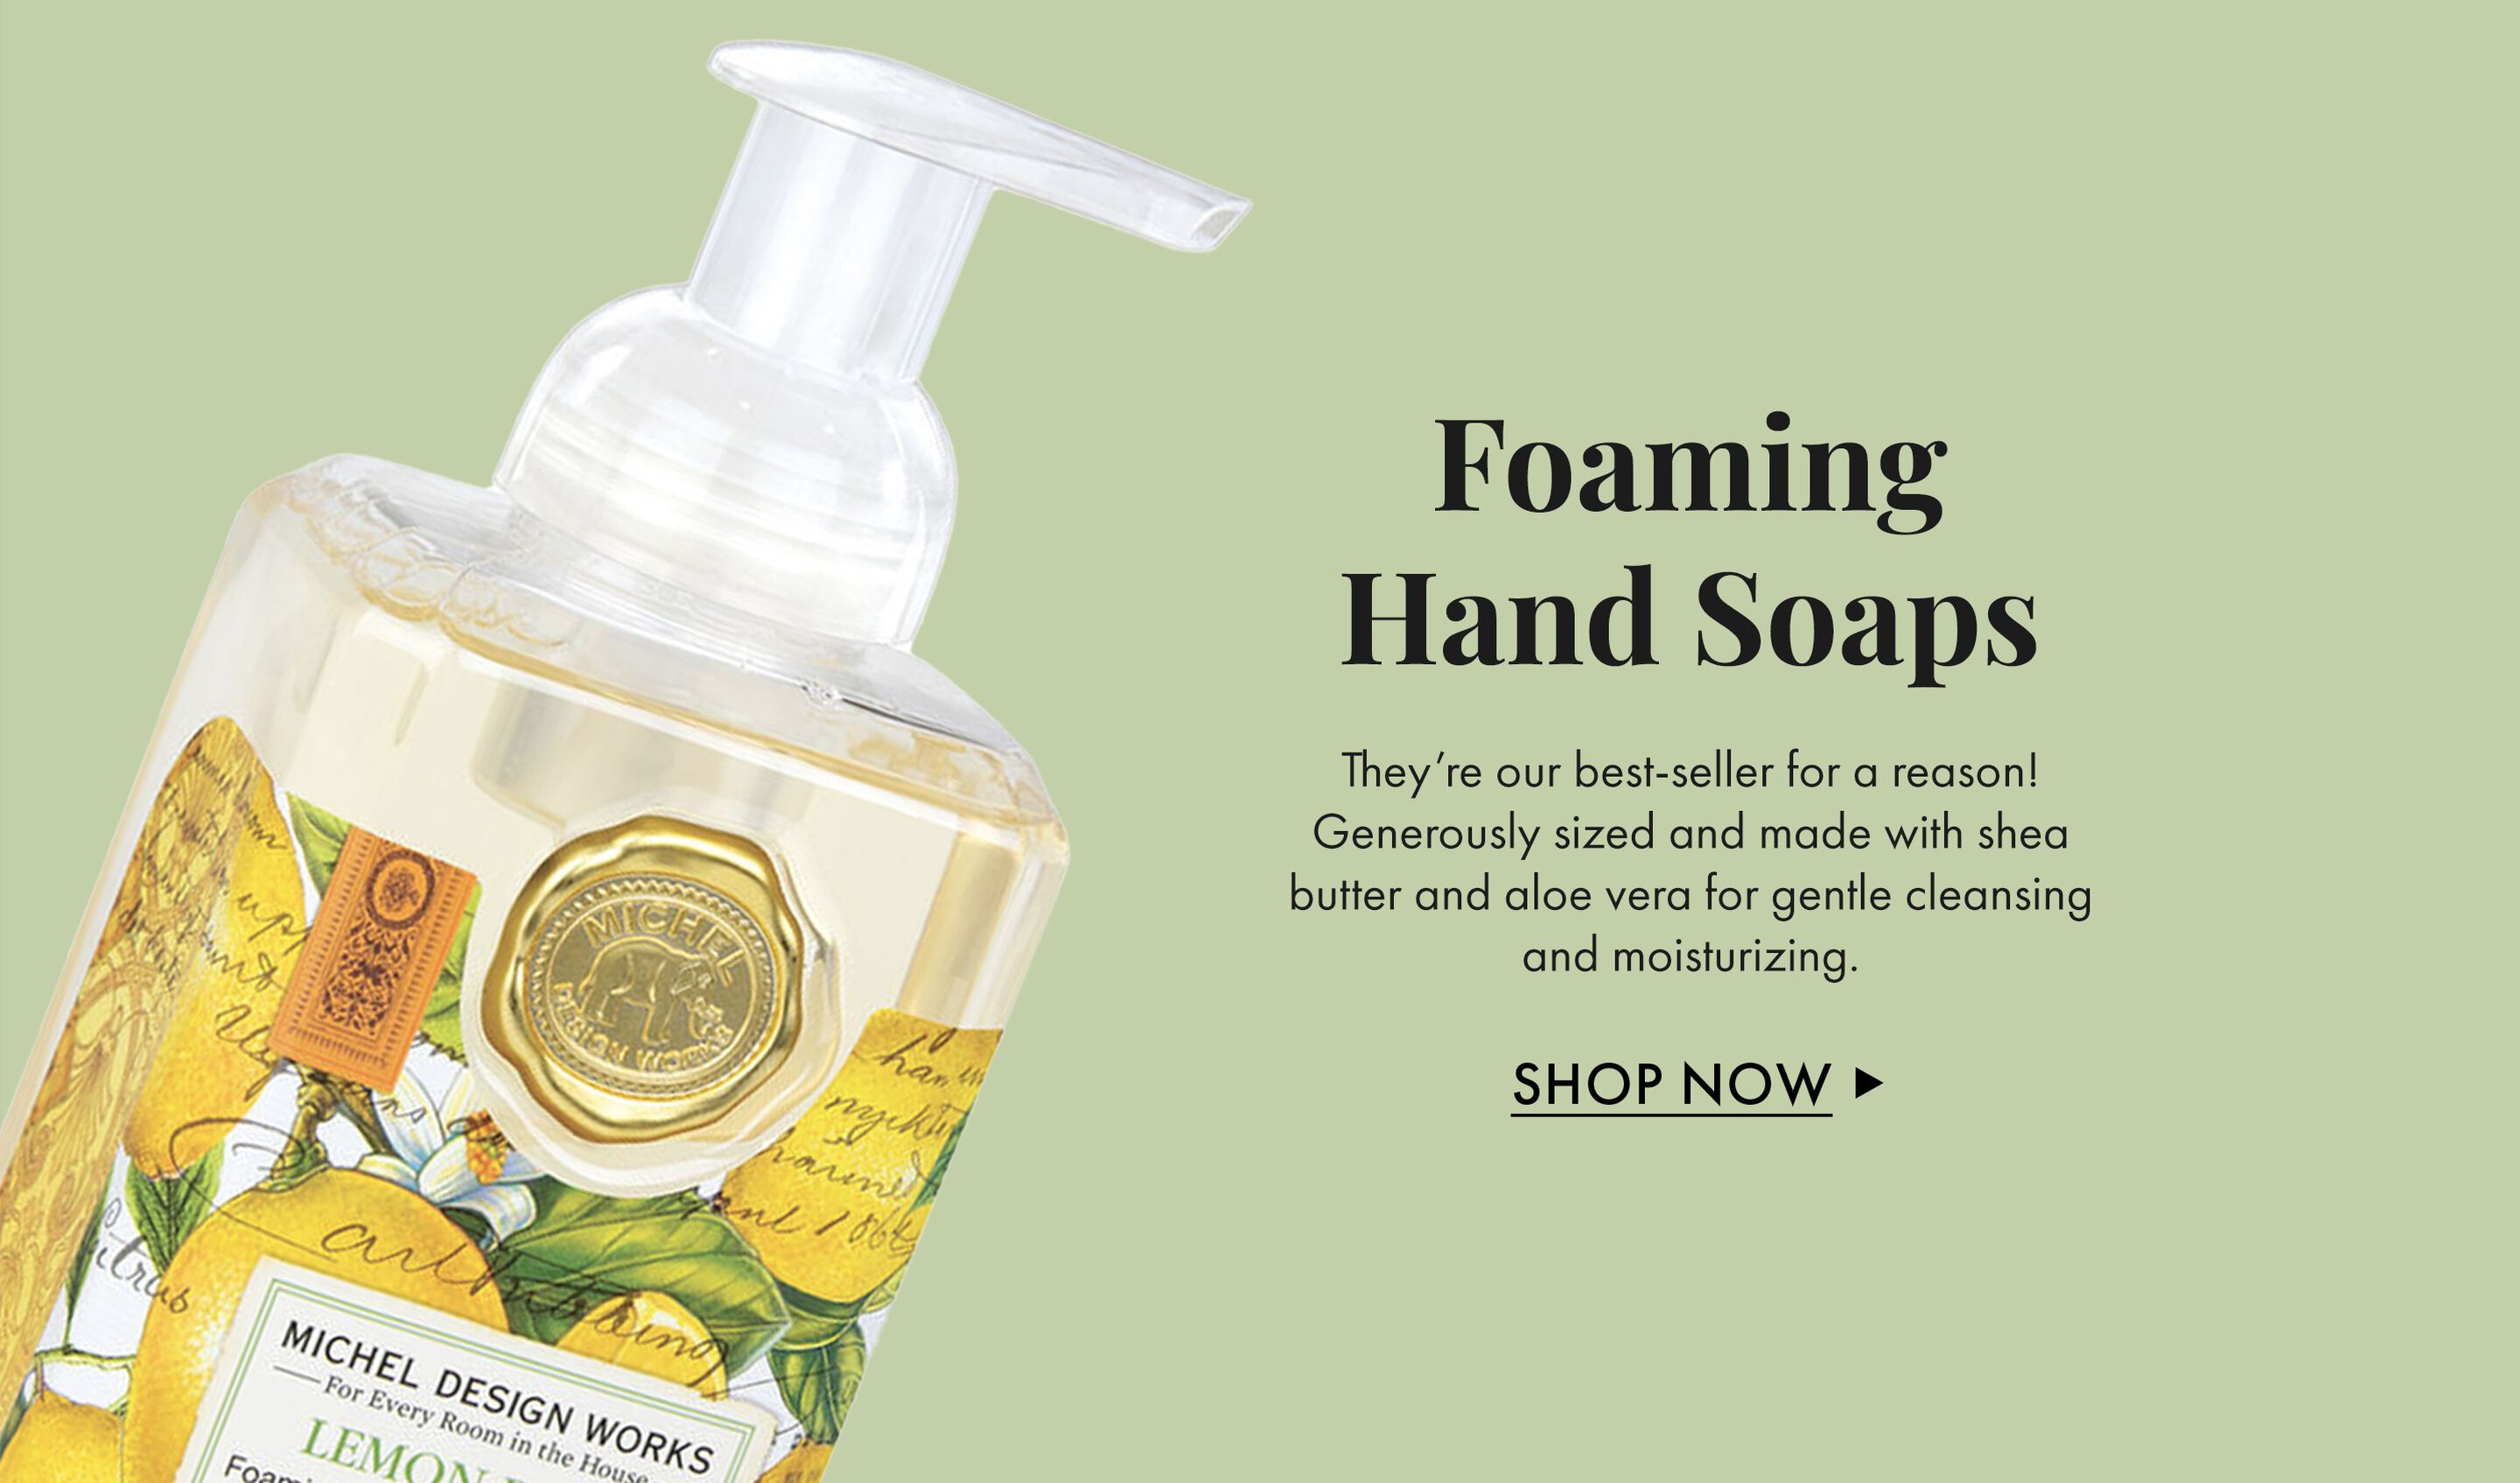 Foaming Hand Soaps | They're our best-seller for a reason! Generously sized and made with shea butter and aloe vera for gentle cleansing and moisturizing. | Shop Now